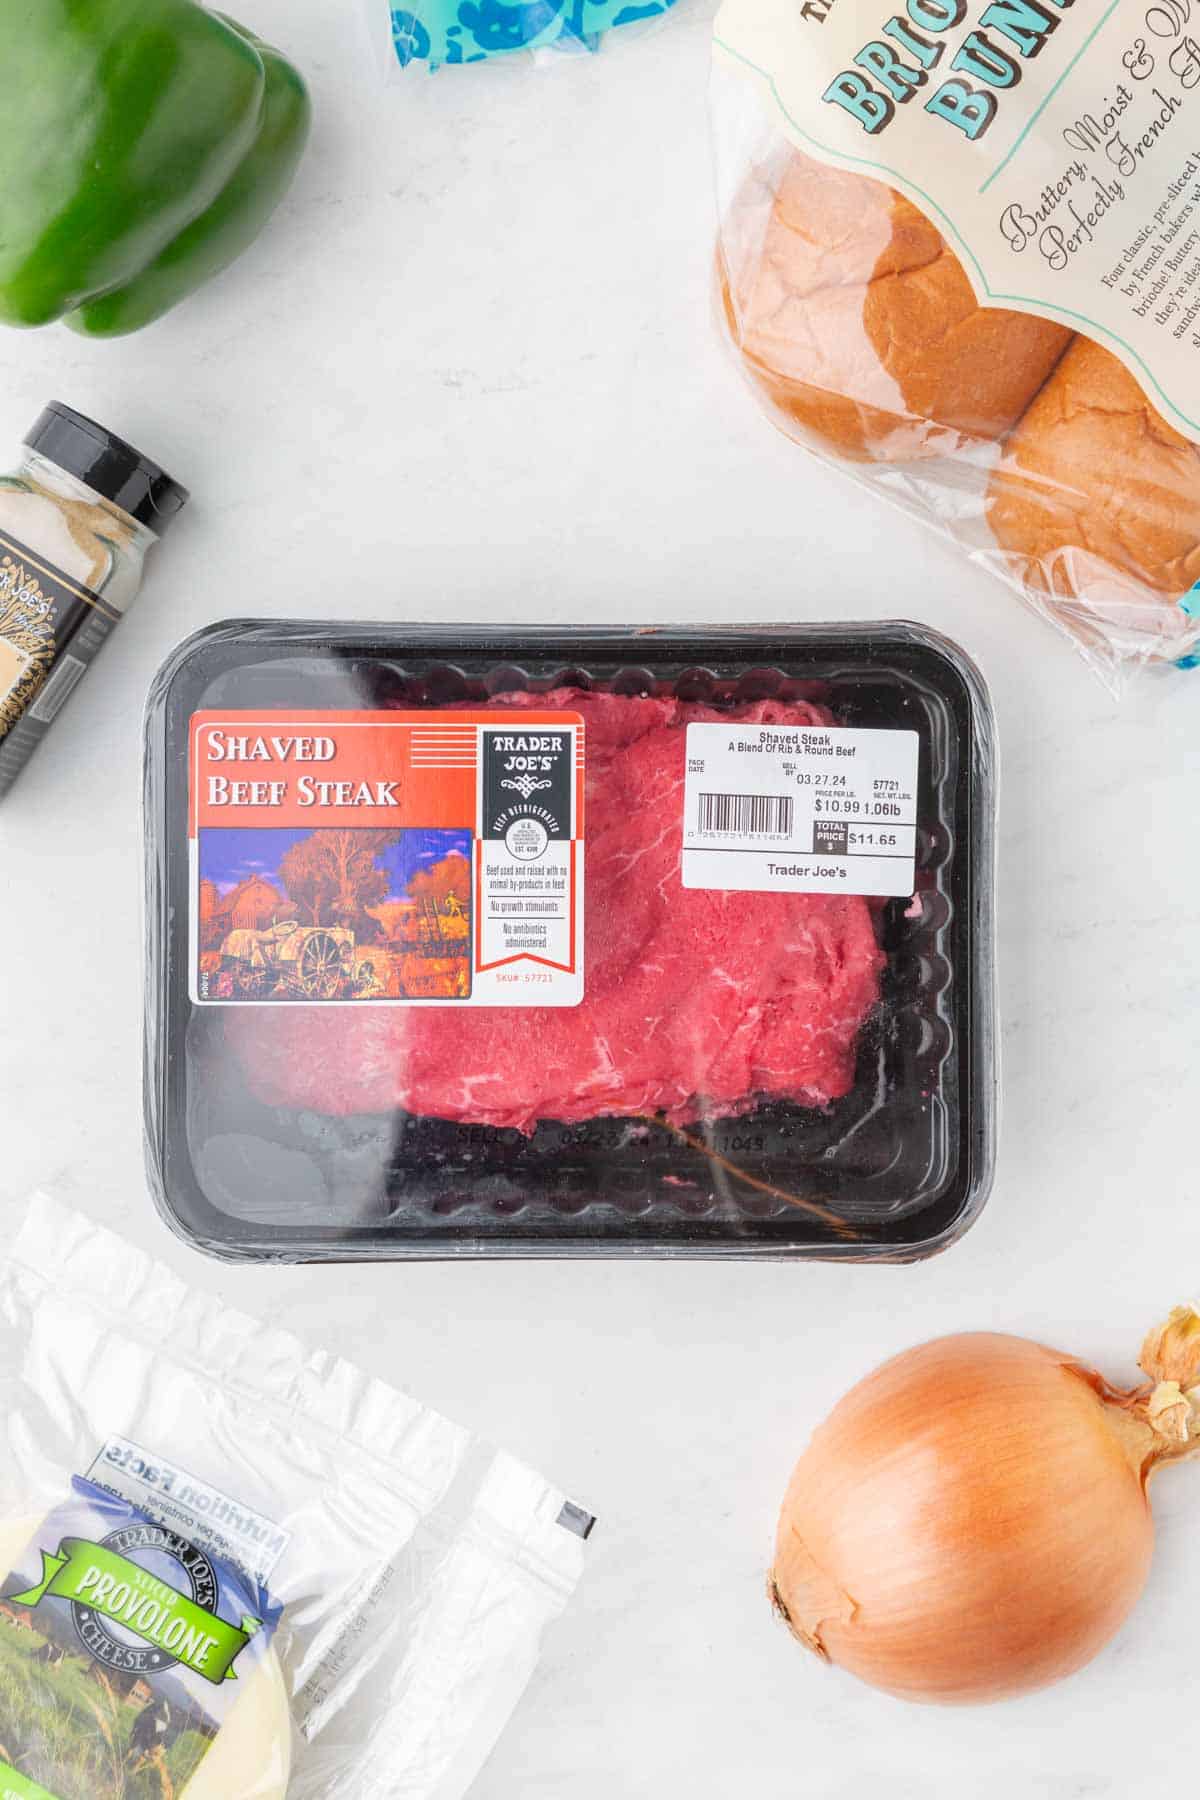  A package of Trader Joe's Shaved Beef Steak on a counter.